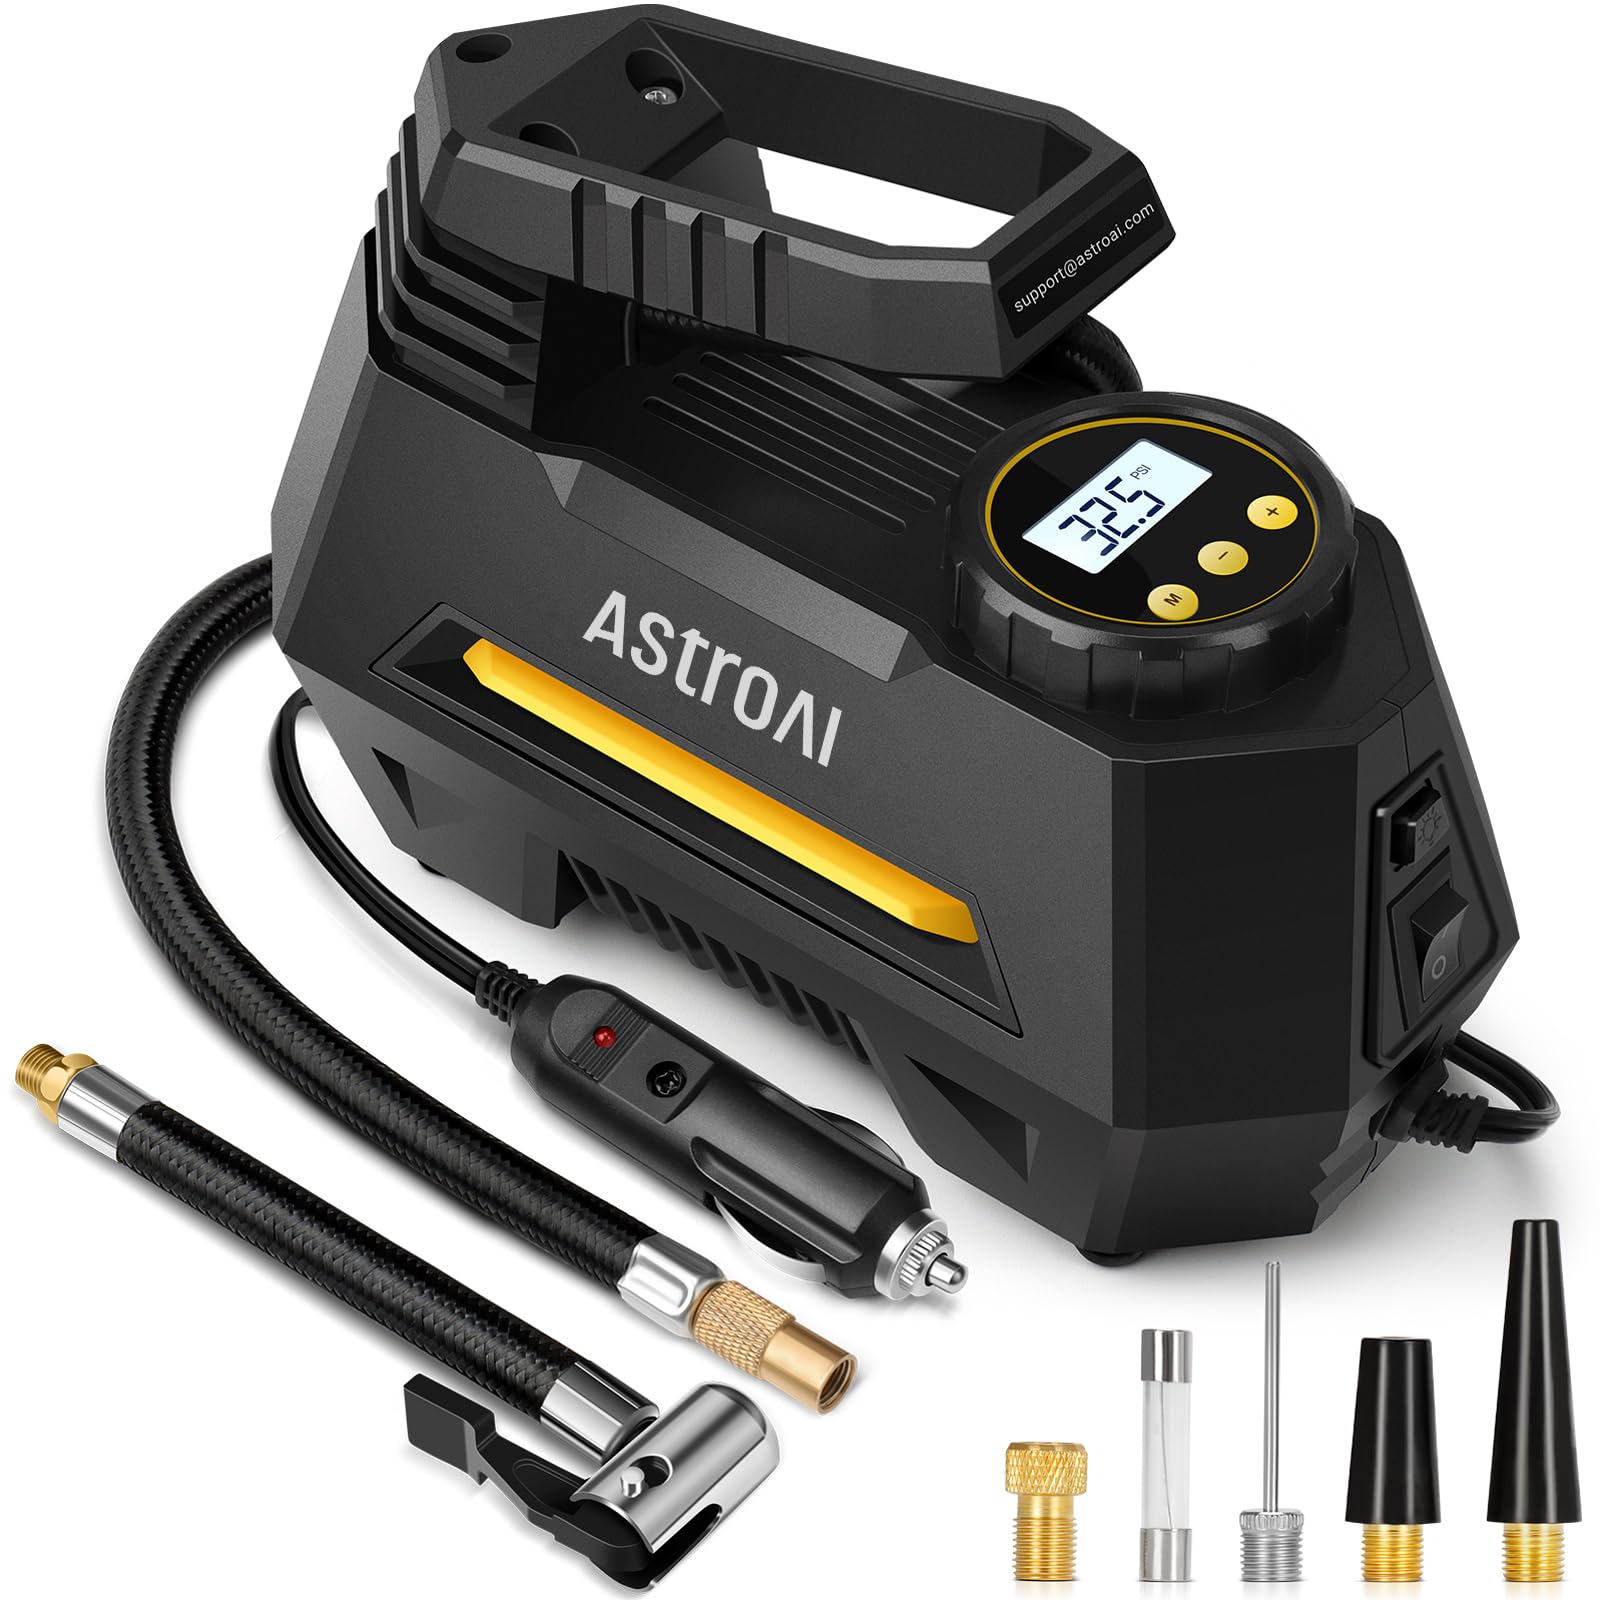 AstroAI Tyre Inflator Air Compressor 12V, Portable Electric Auto - Stop Car Tyre Pump with Tyre Pressure Gauge, Valve Adaptors and LED Light, Car Accessories, Yellow - Ammpoure Wellbeing